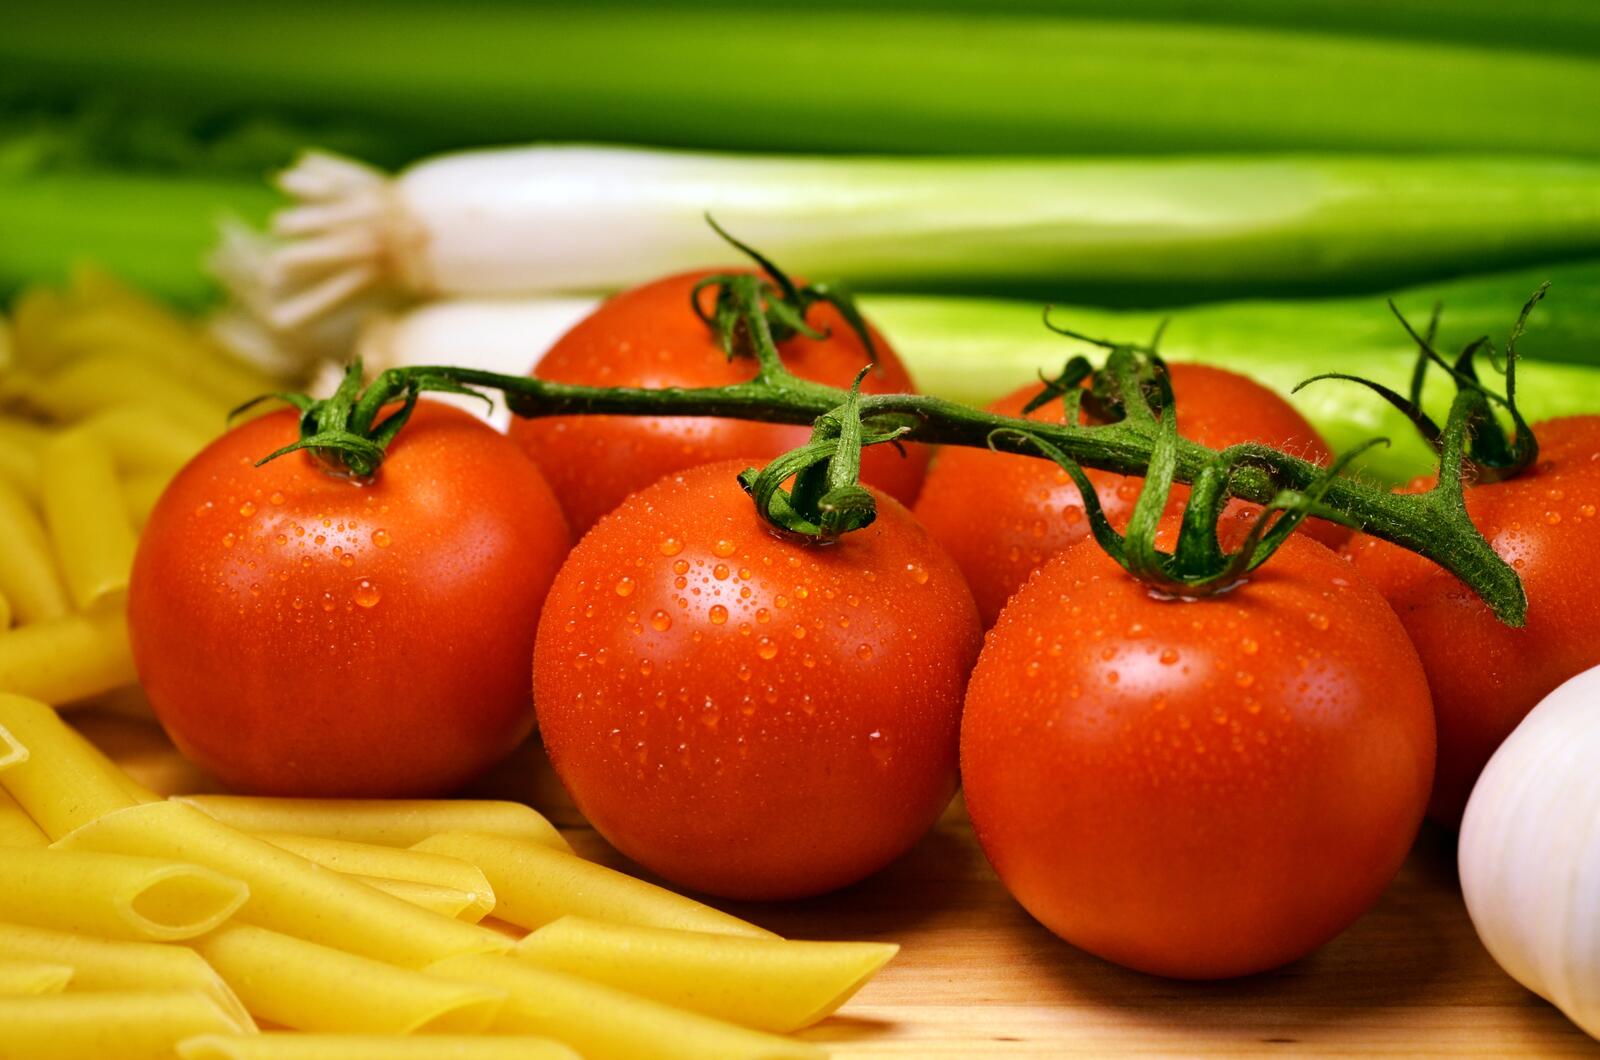 Wallpapers tomatoes onion pasta on the desktop